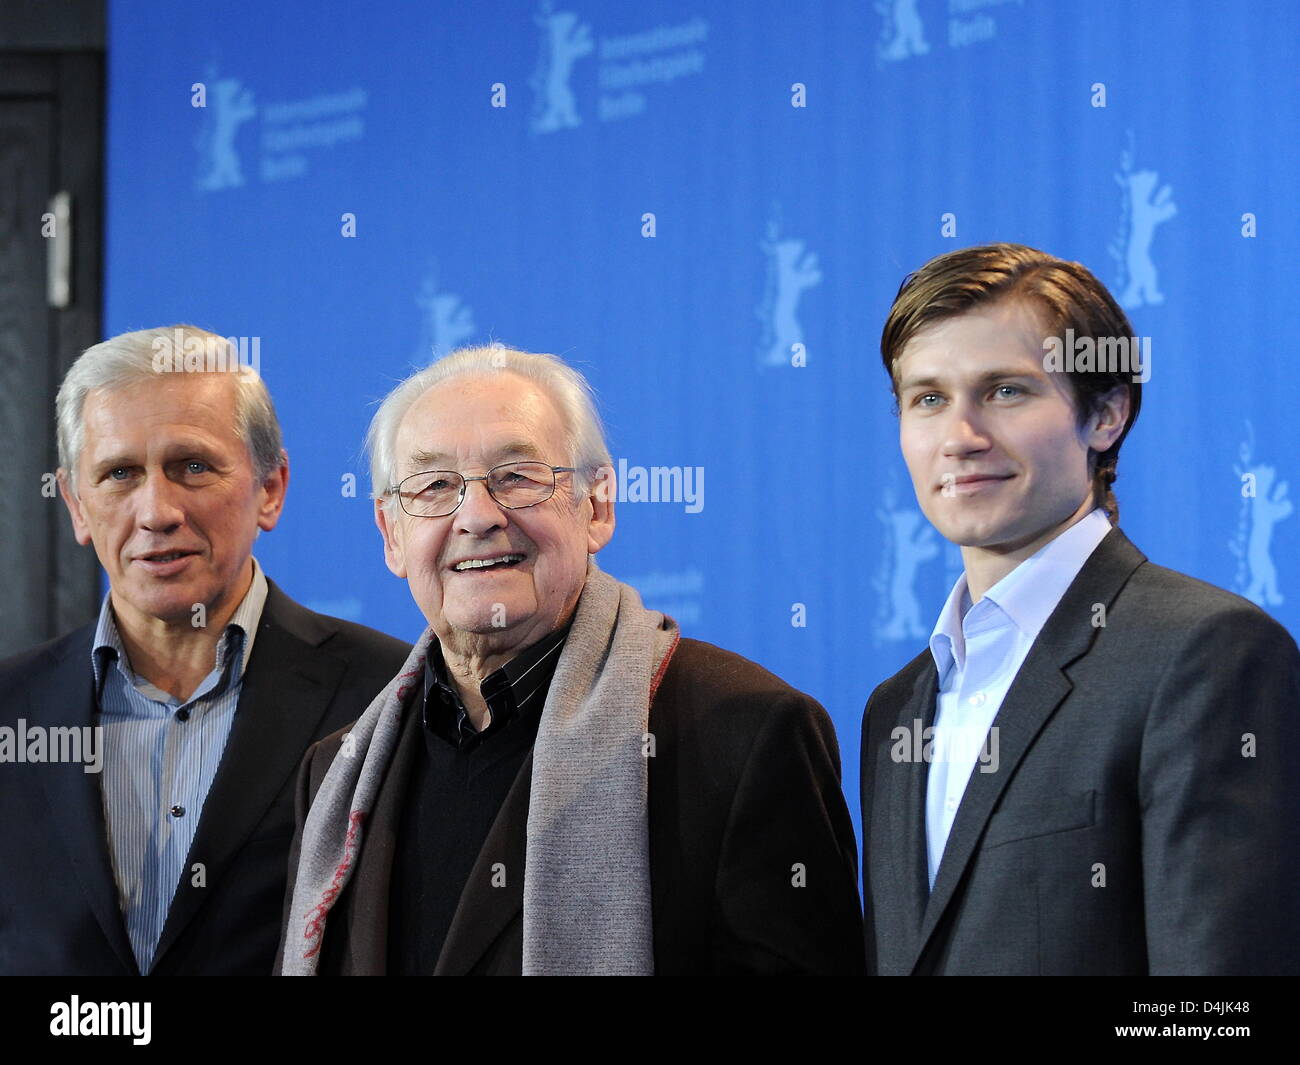 Polish actors Pawel Szajda (R) and Jan Englert (L) pose with Polish director Andrzej Wadja during the photo call on the film ?Sweet Rush? at the 59th Berlin International Film Festival in Berlin, Germany, 13 February 2009. The film runs in Competition, a total of 18 films compete for the Silver and Golden Bears of the 59th Berlinale. Photo: Joerg Carstensen Stock Photo